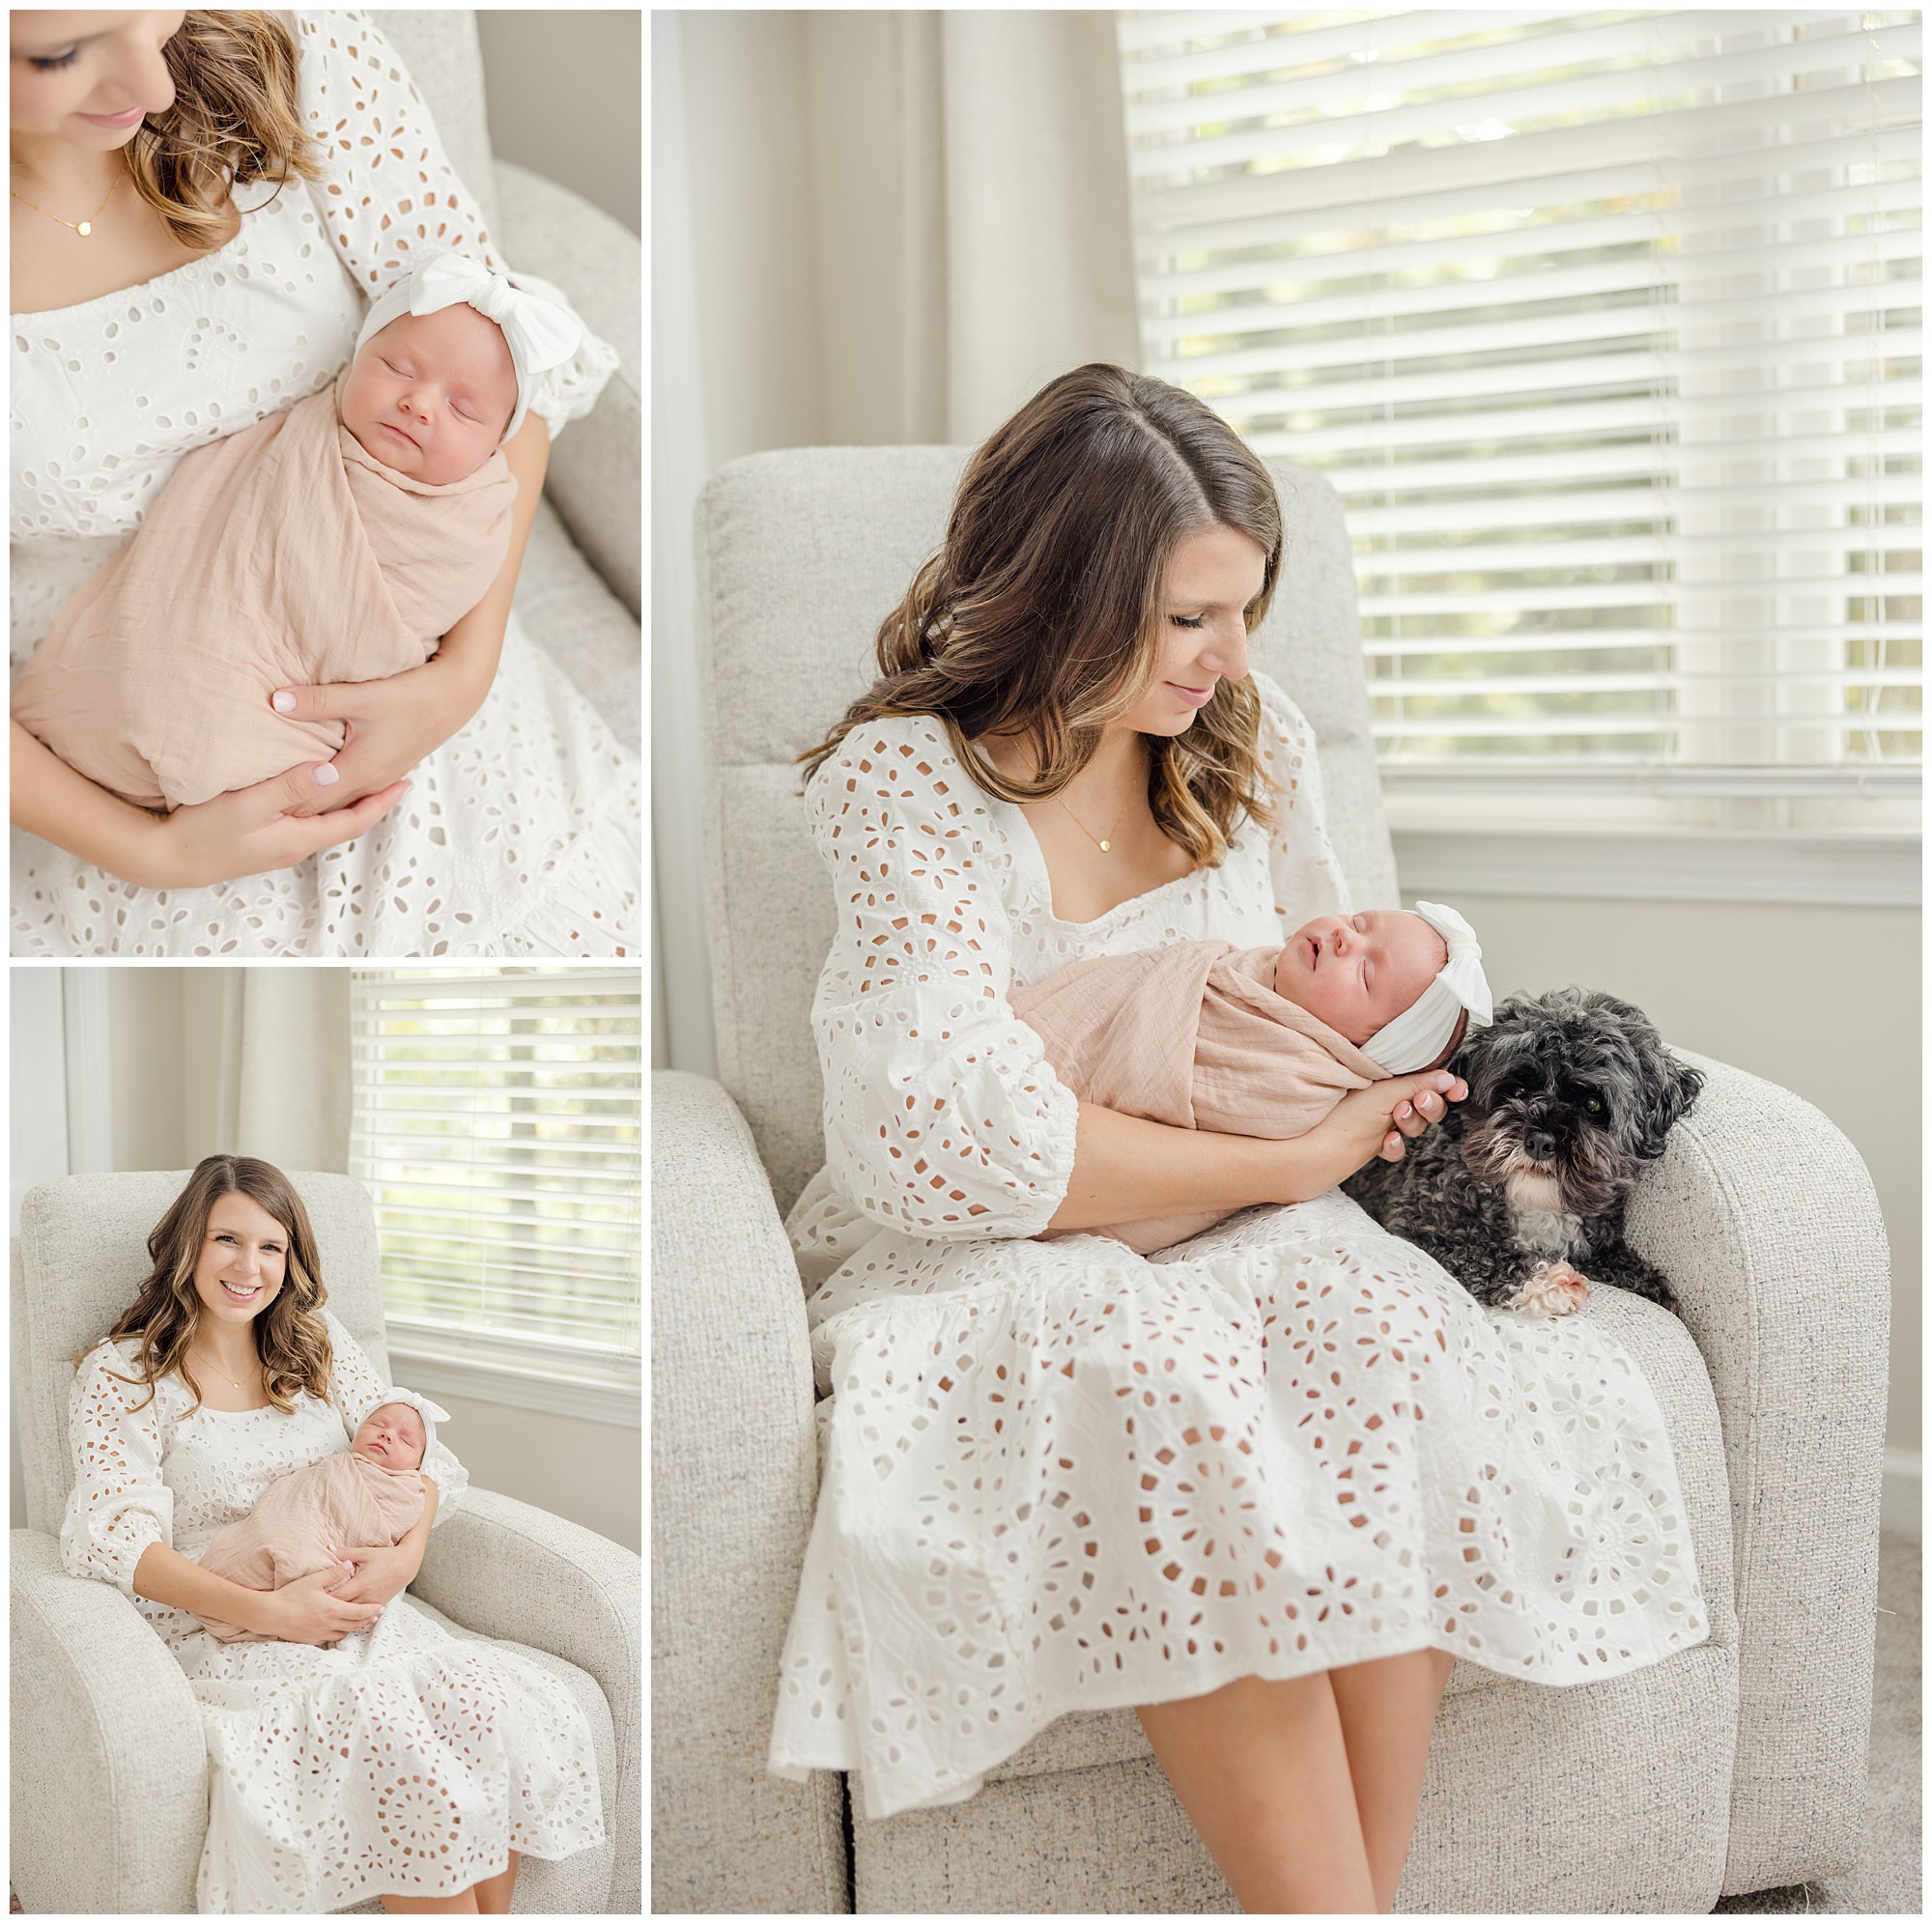 A mother wears a white dress sitting in a rocker with her newborn baby girl and dog during her Greenville SC newborn photography session.